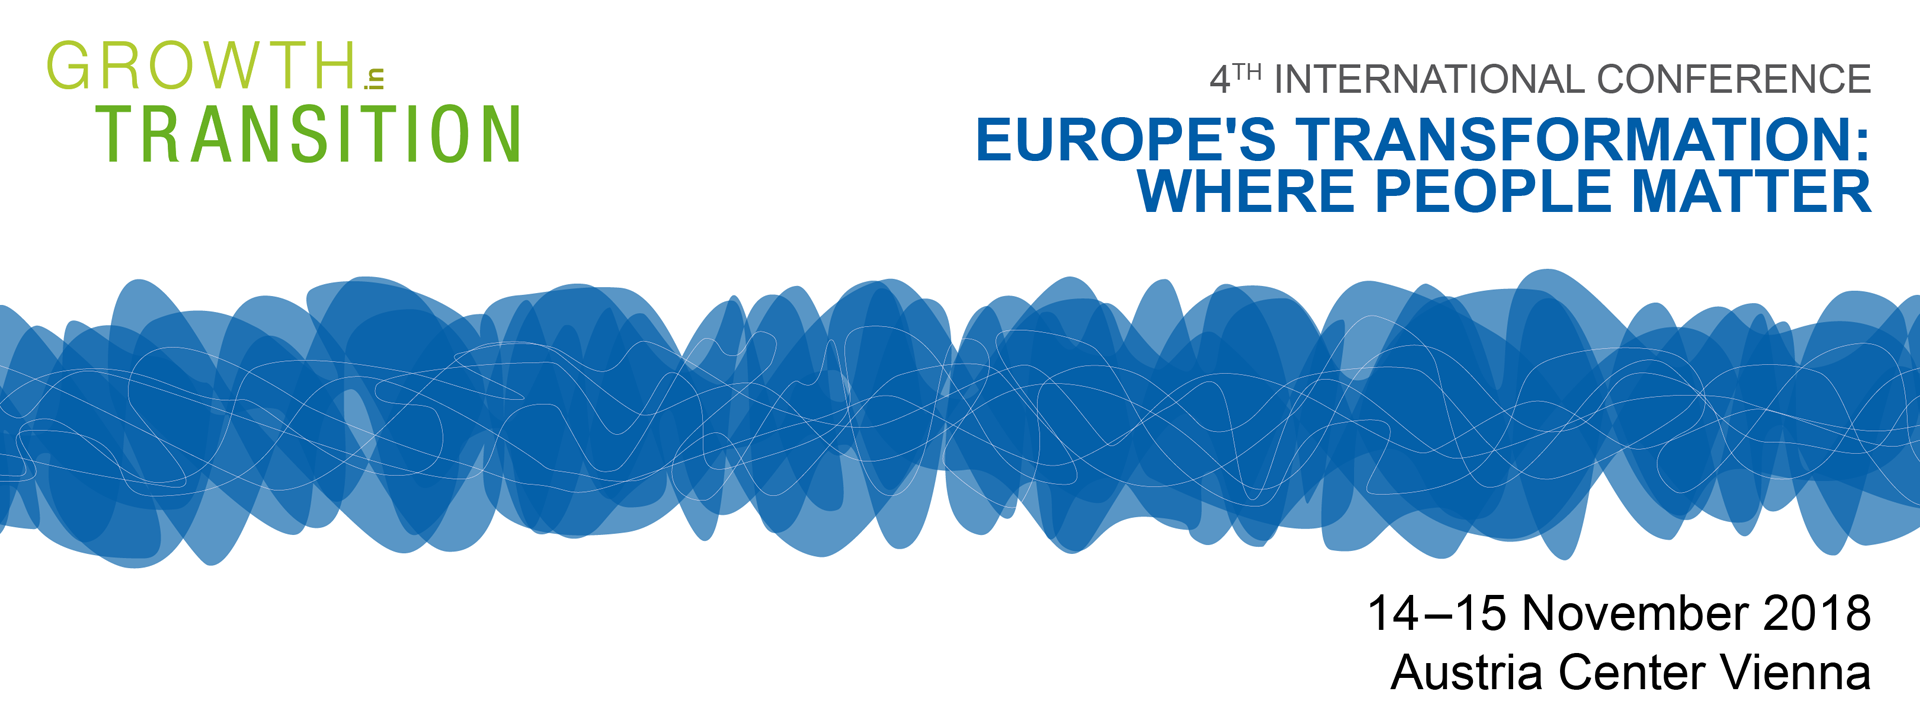 4th International Conference Growth in Transition: Europe’s Transformation: Where People Matter. 14 - 15 November 2018, Vienna